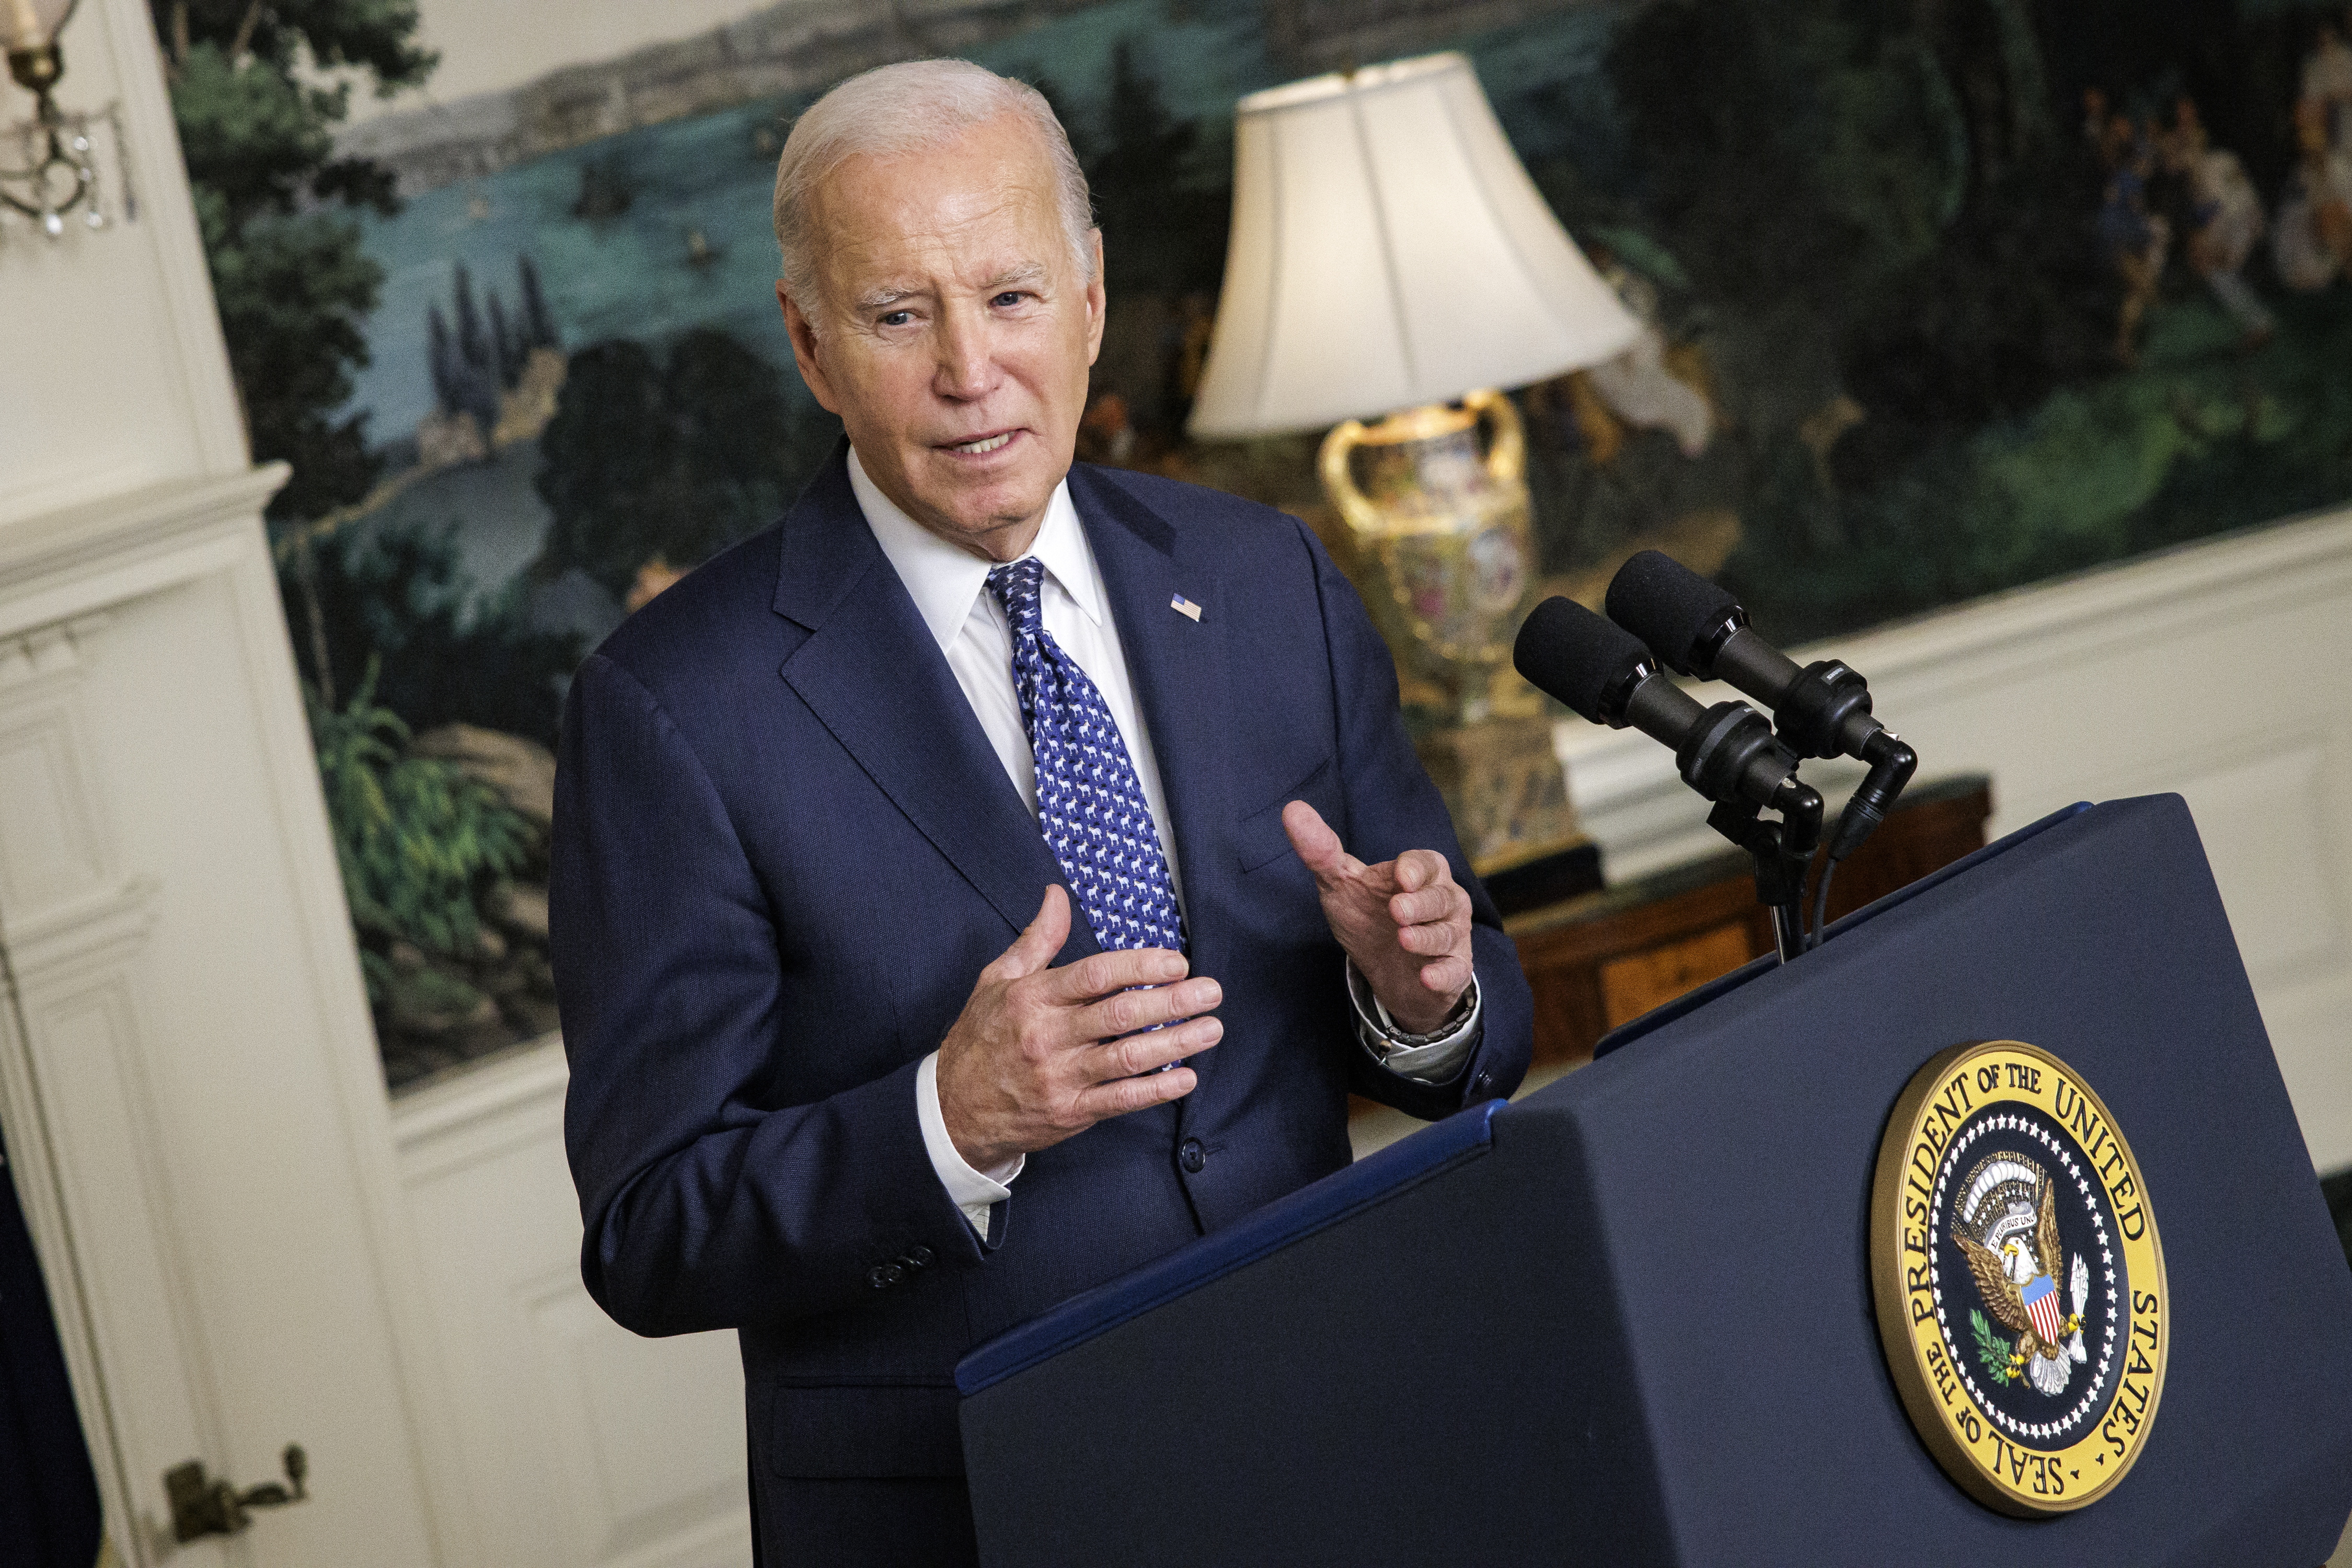 President Biden’s White House has released the transcript of the interview but not the audio